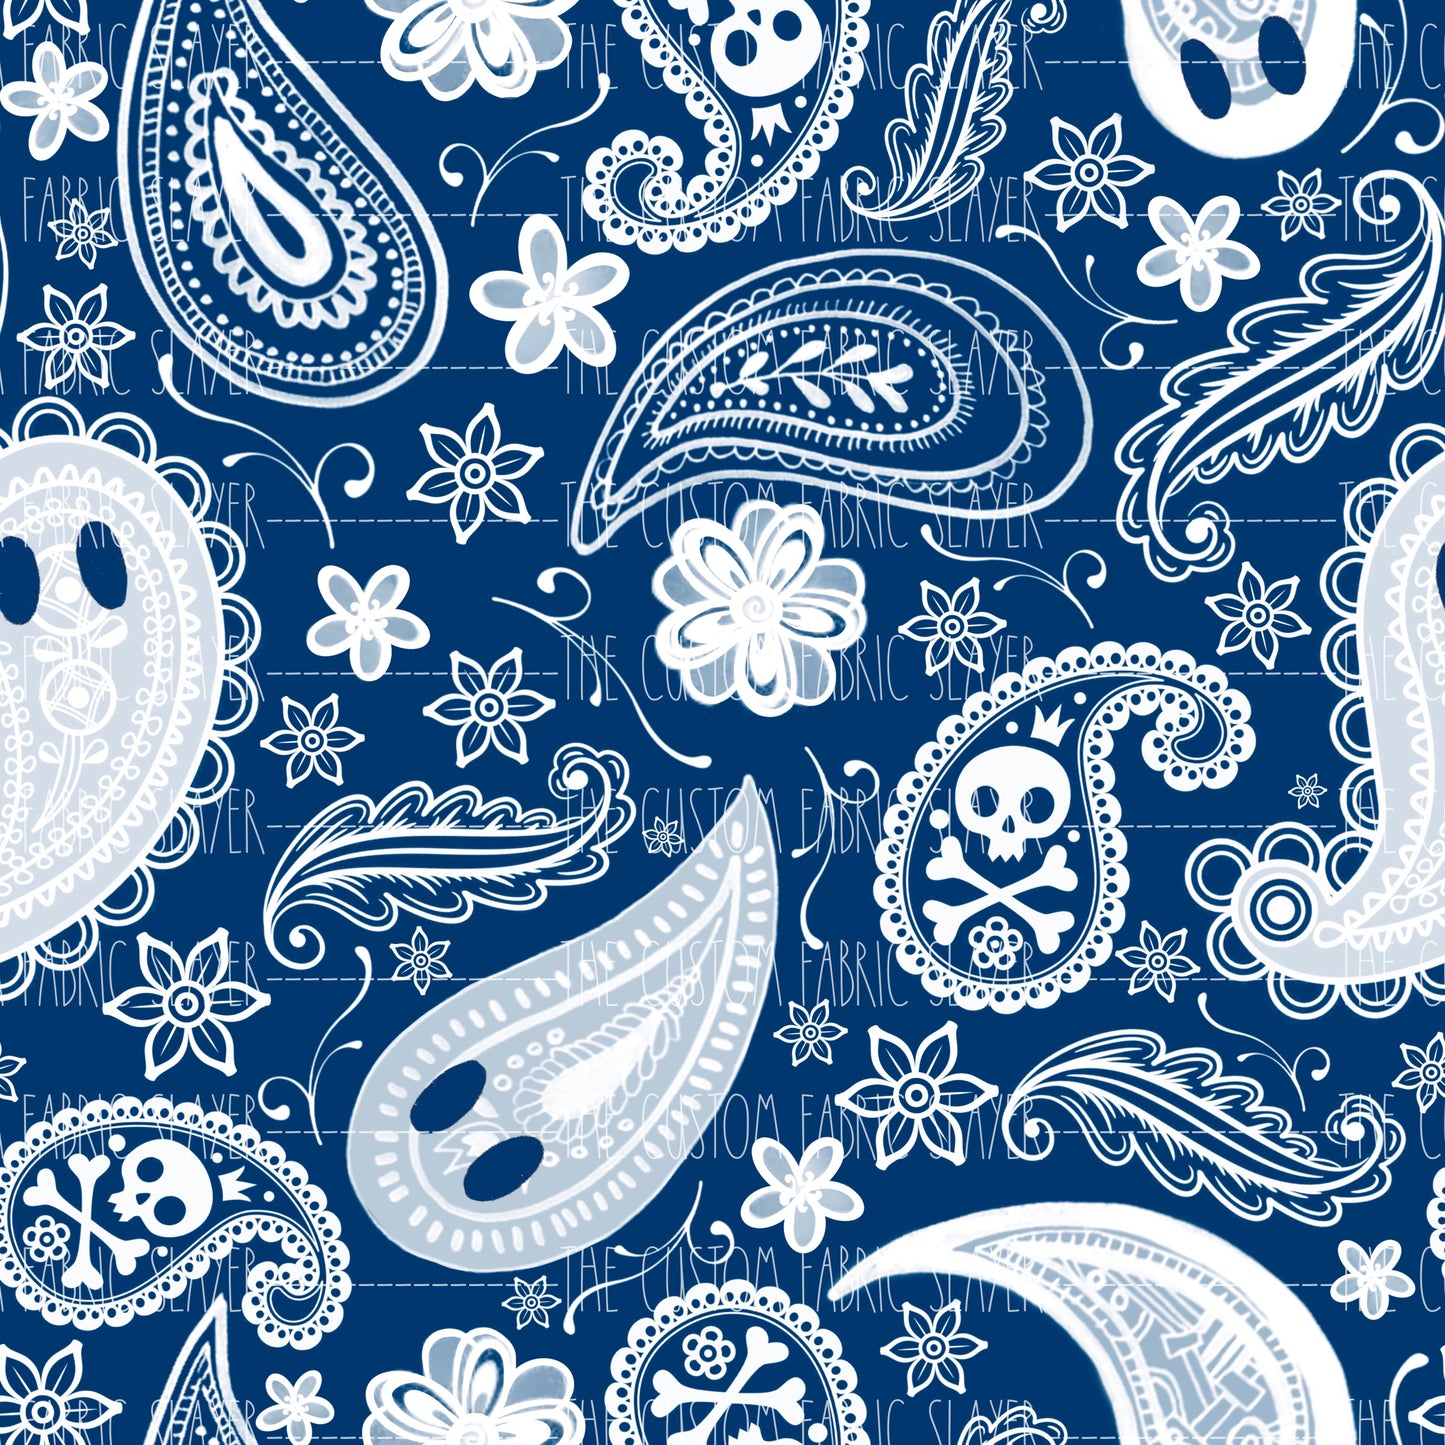 Blue Paisley Boos - HEXREJECT